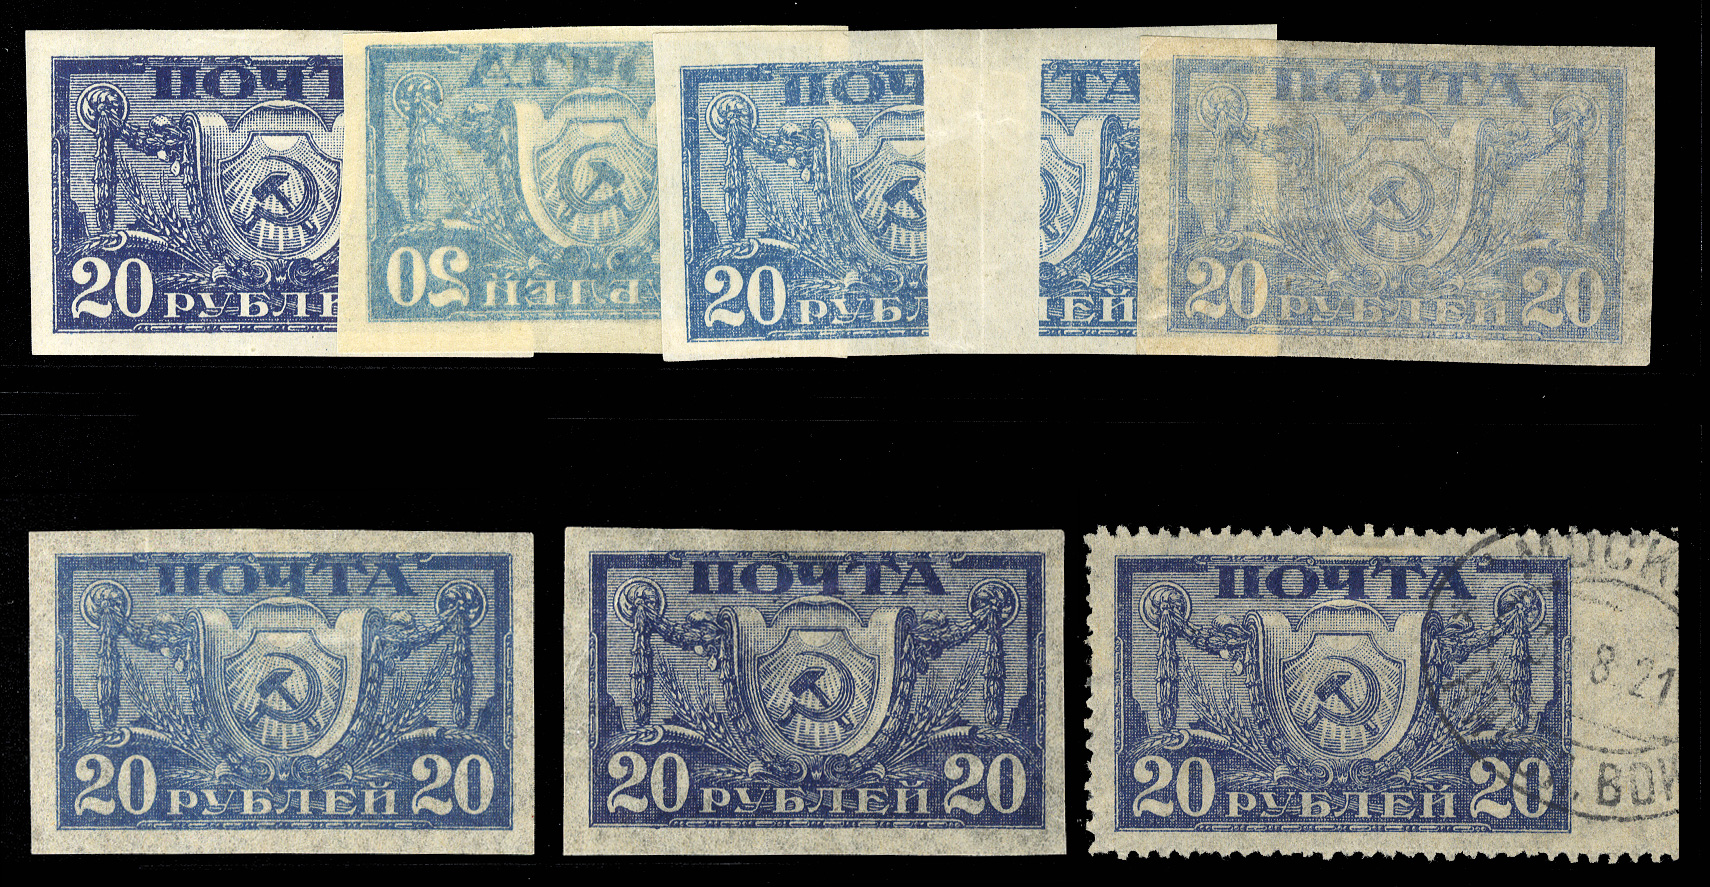 20 rubles, group of seven varieties, including the scarce ultramarine, variety full offset on gum, also spectacular folded-over; Pelure paper color varieties include light blue, Prussian blue, gray ultramarine, also privately perforated single cancelled "Nikolaevski Train Station"